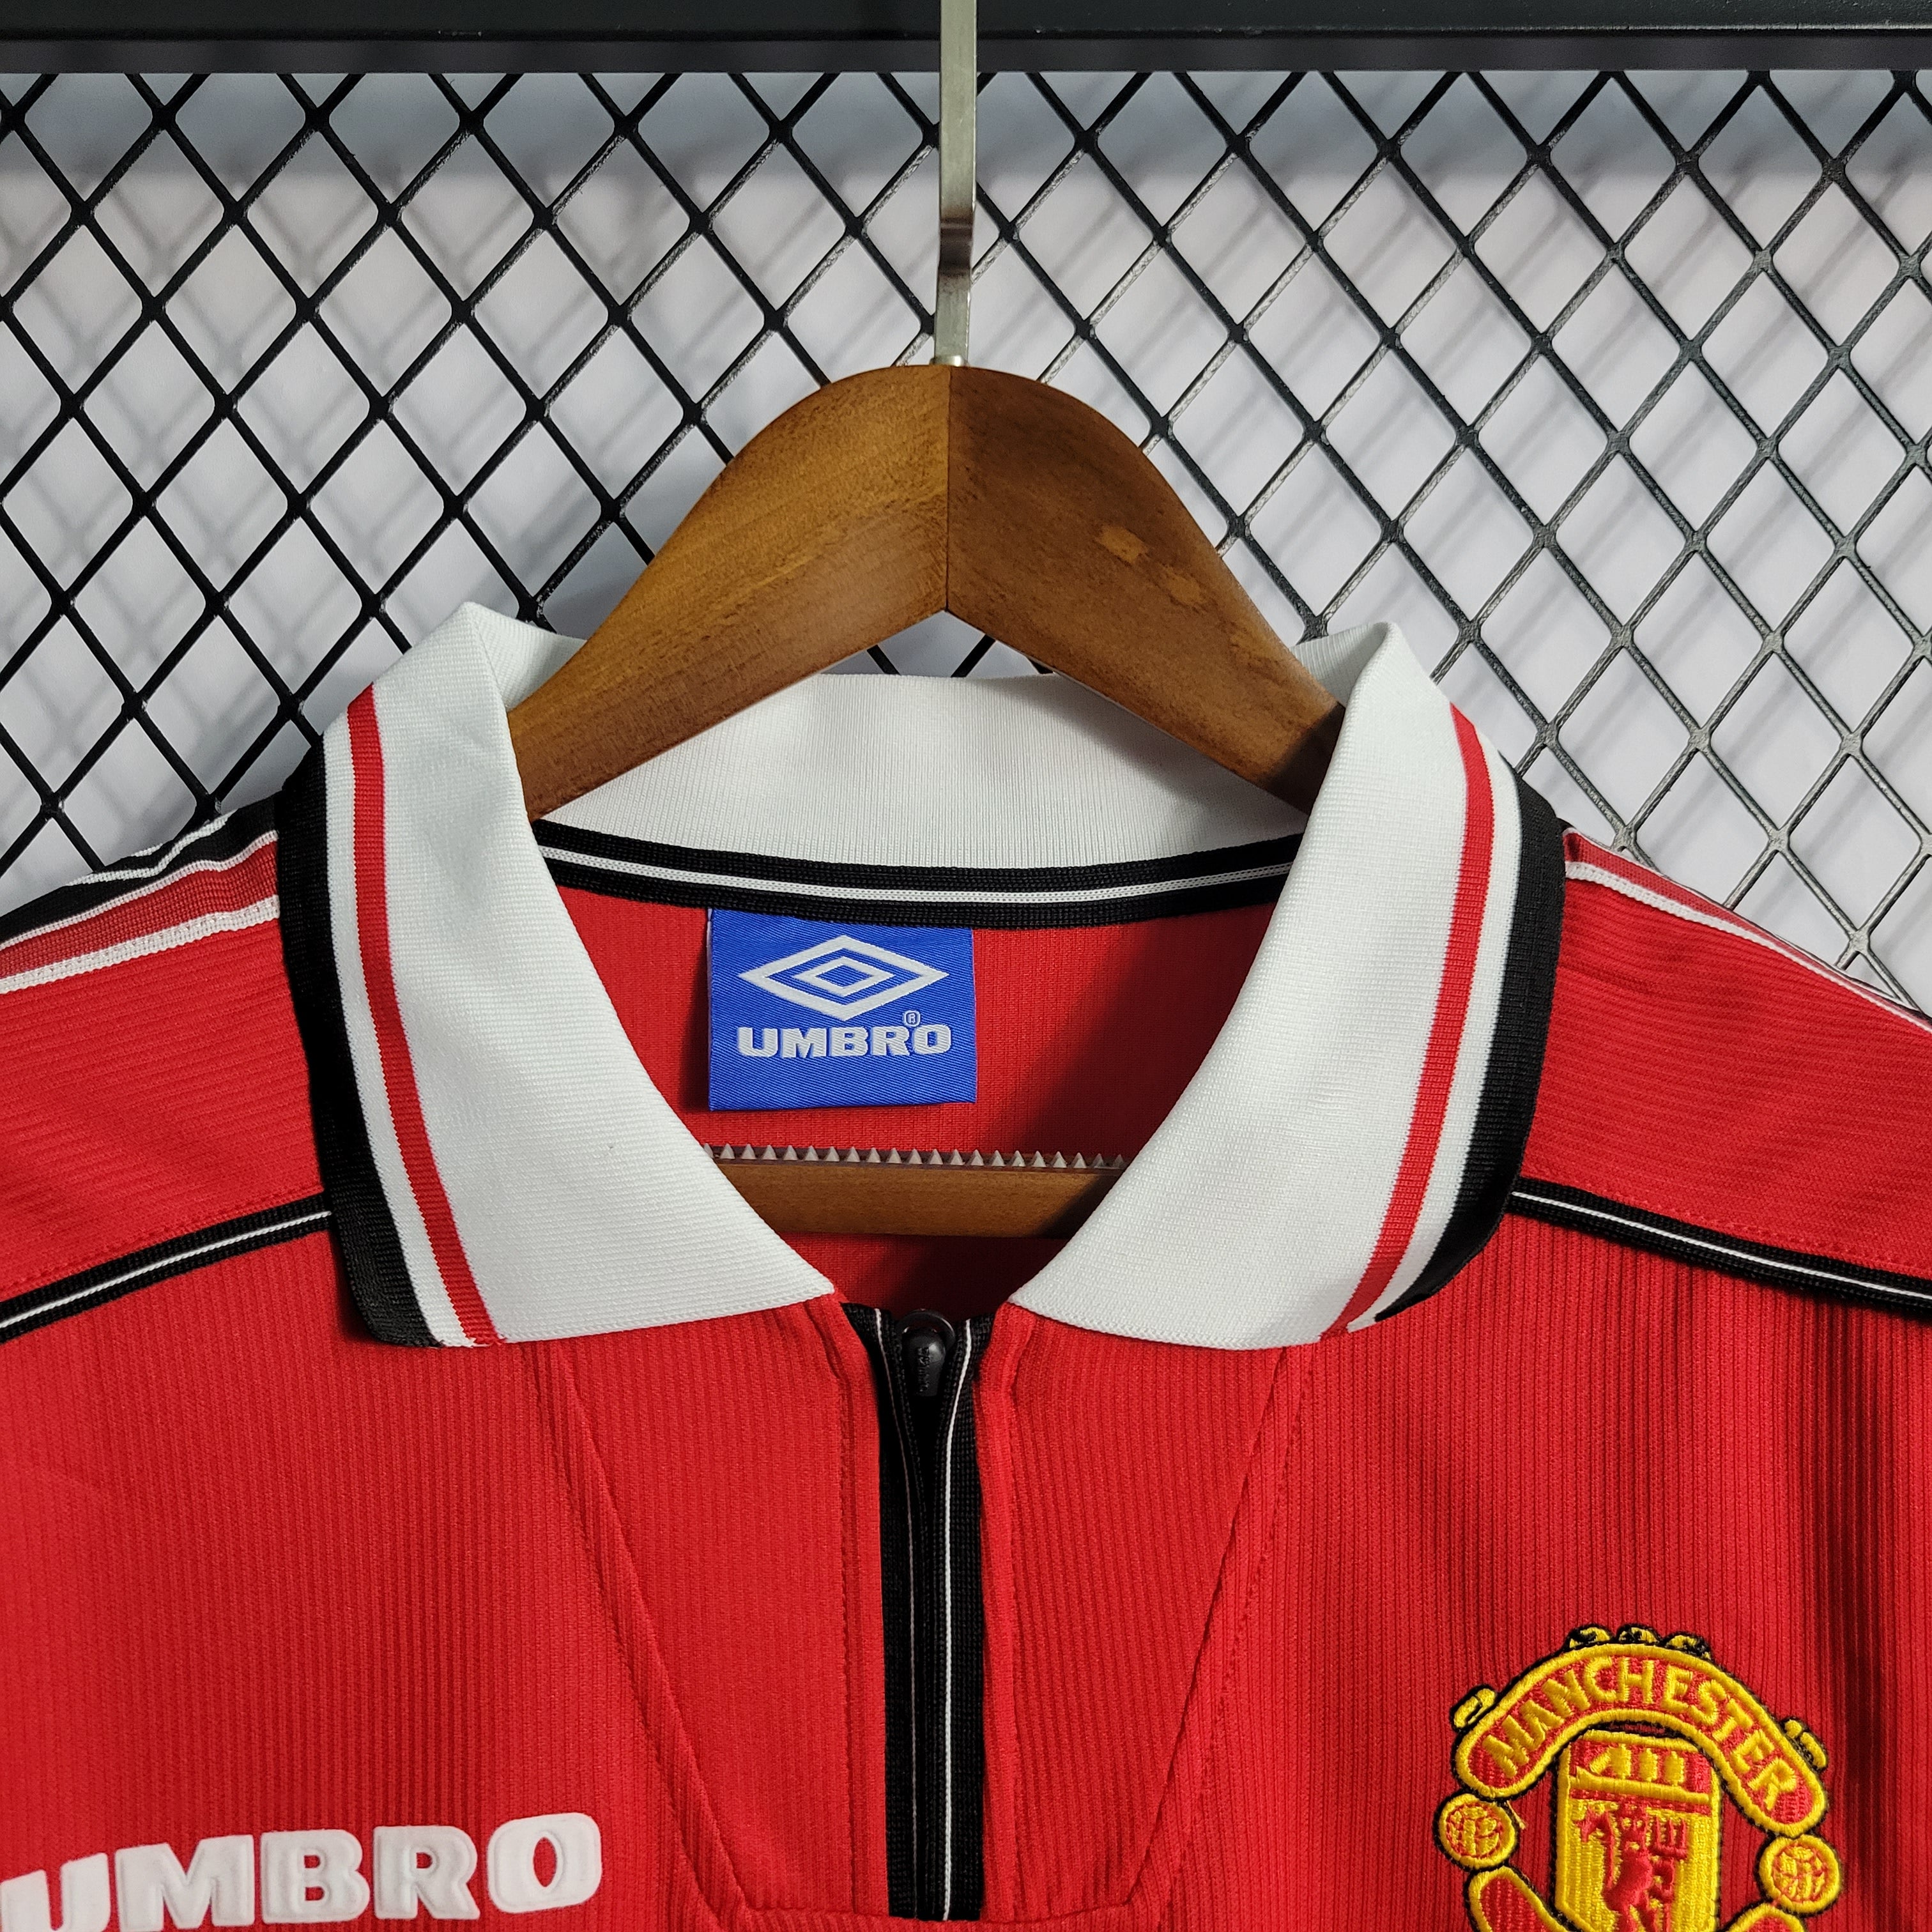 umbro manchester united jersey